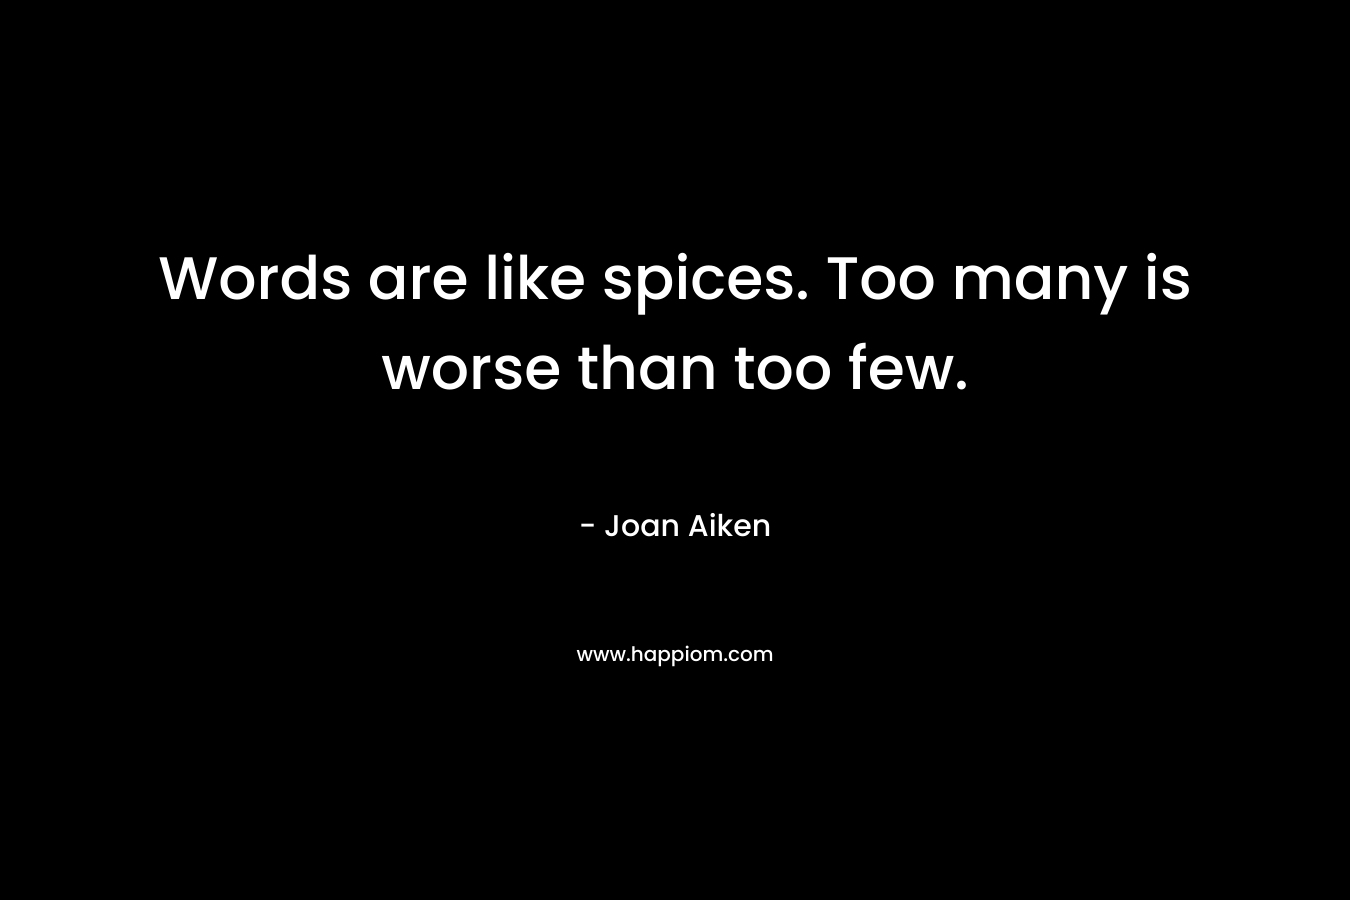 Words are like spices. Too many is worse than too few. – Joan Aiken